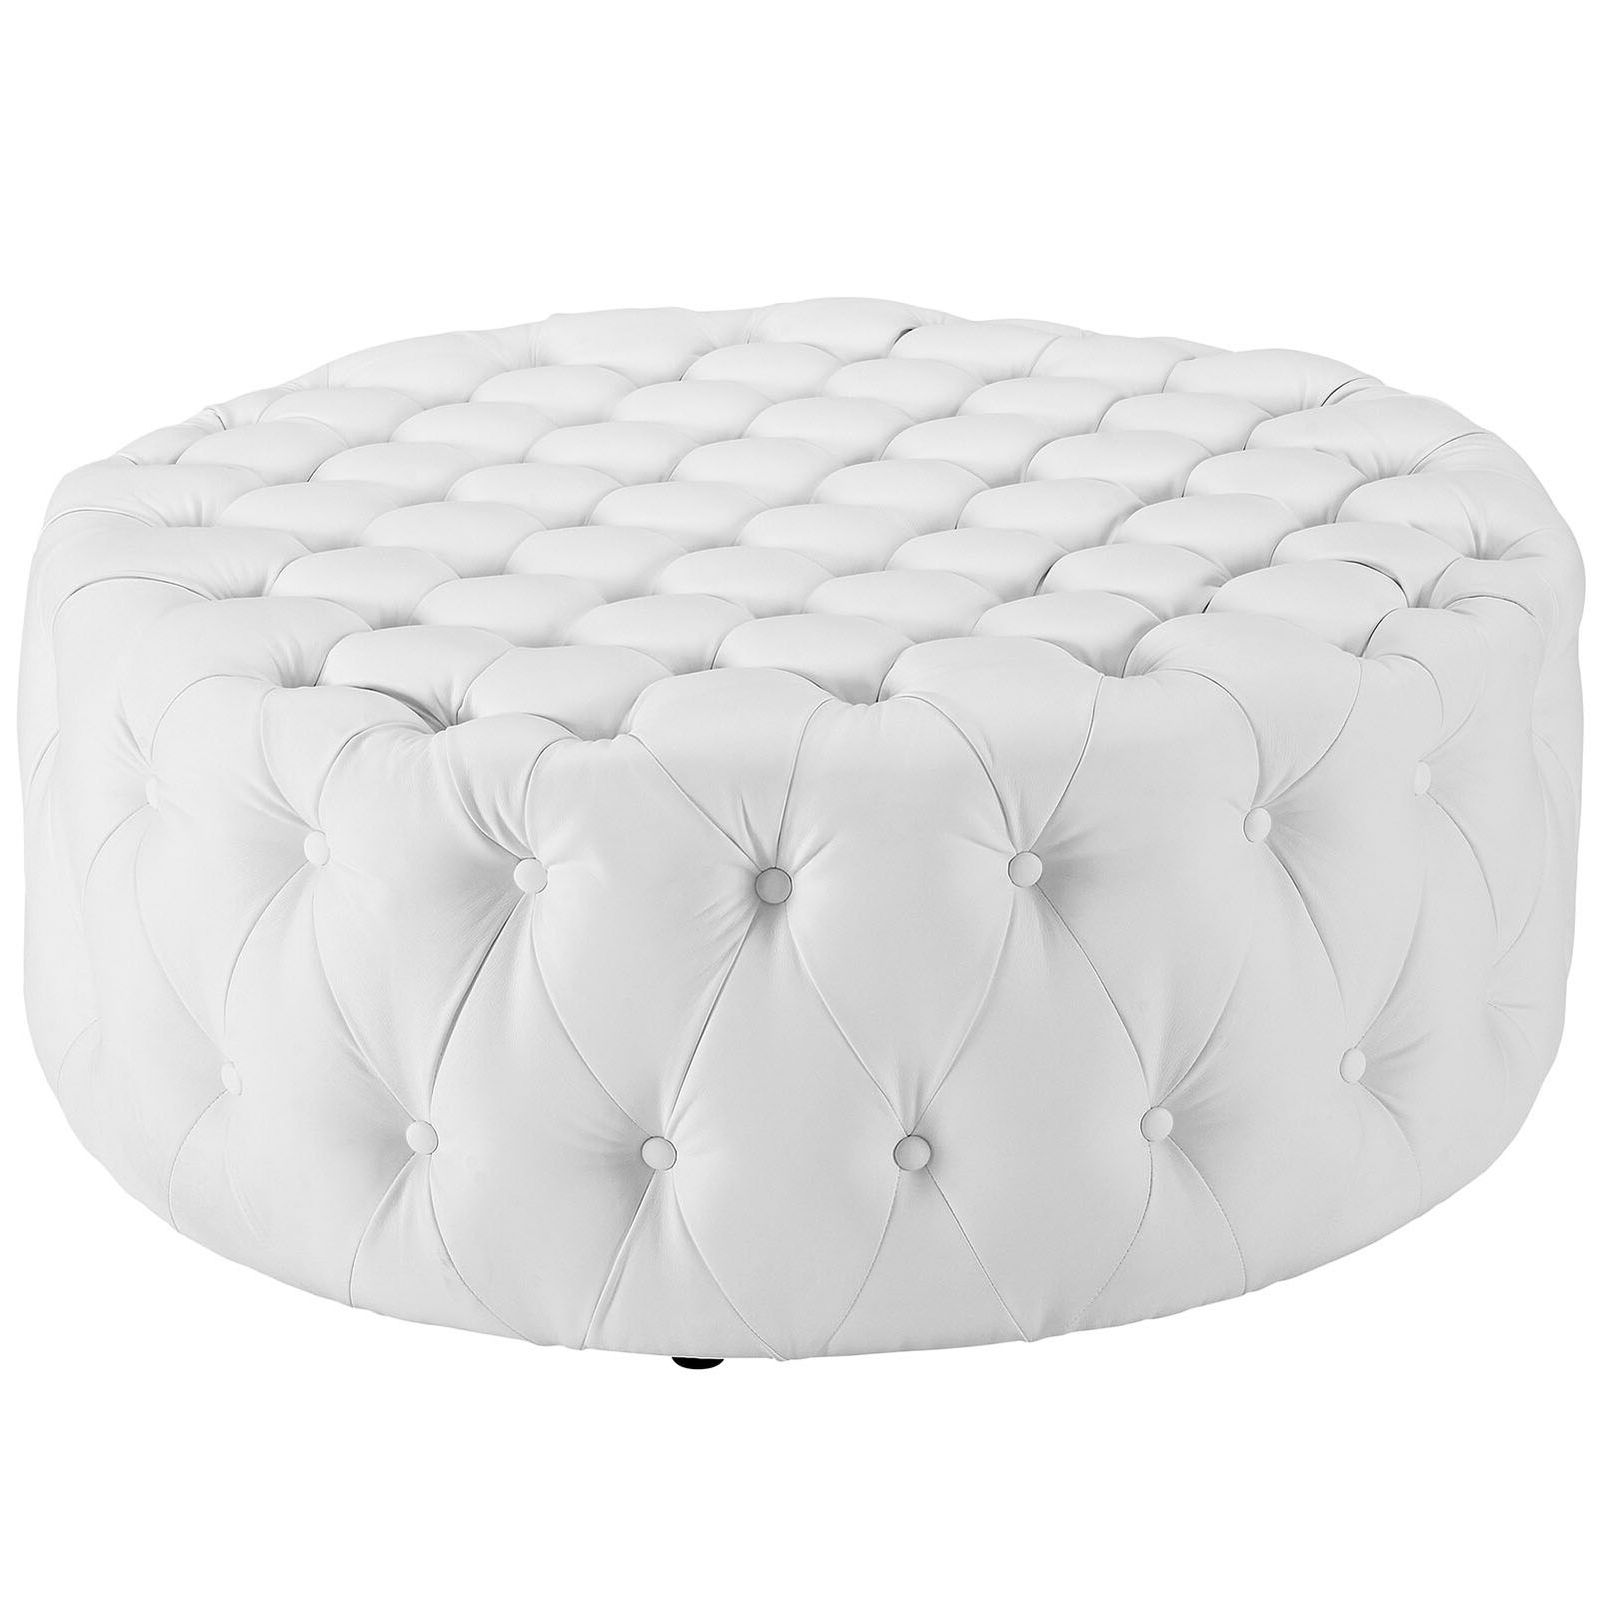 Round Blue Faux Leather Ottomans With Pull Tab In Most Recent Button Tufted Faux Leather Upholstered Round Ottoman In White (View 4 of 10)